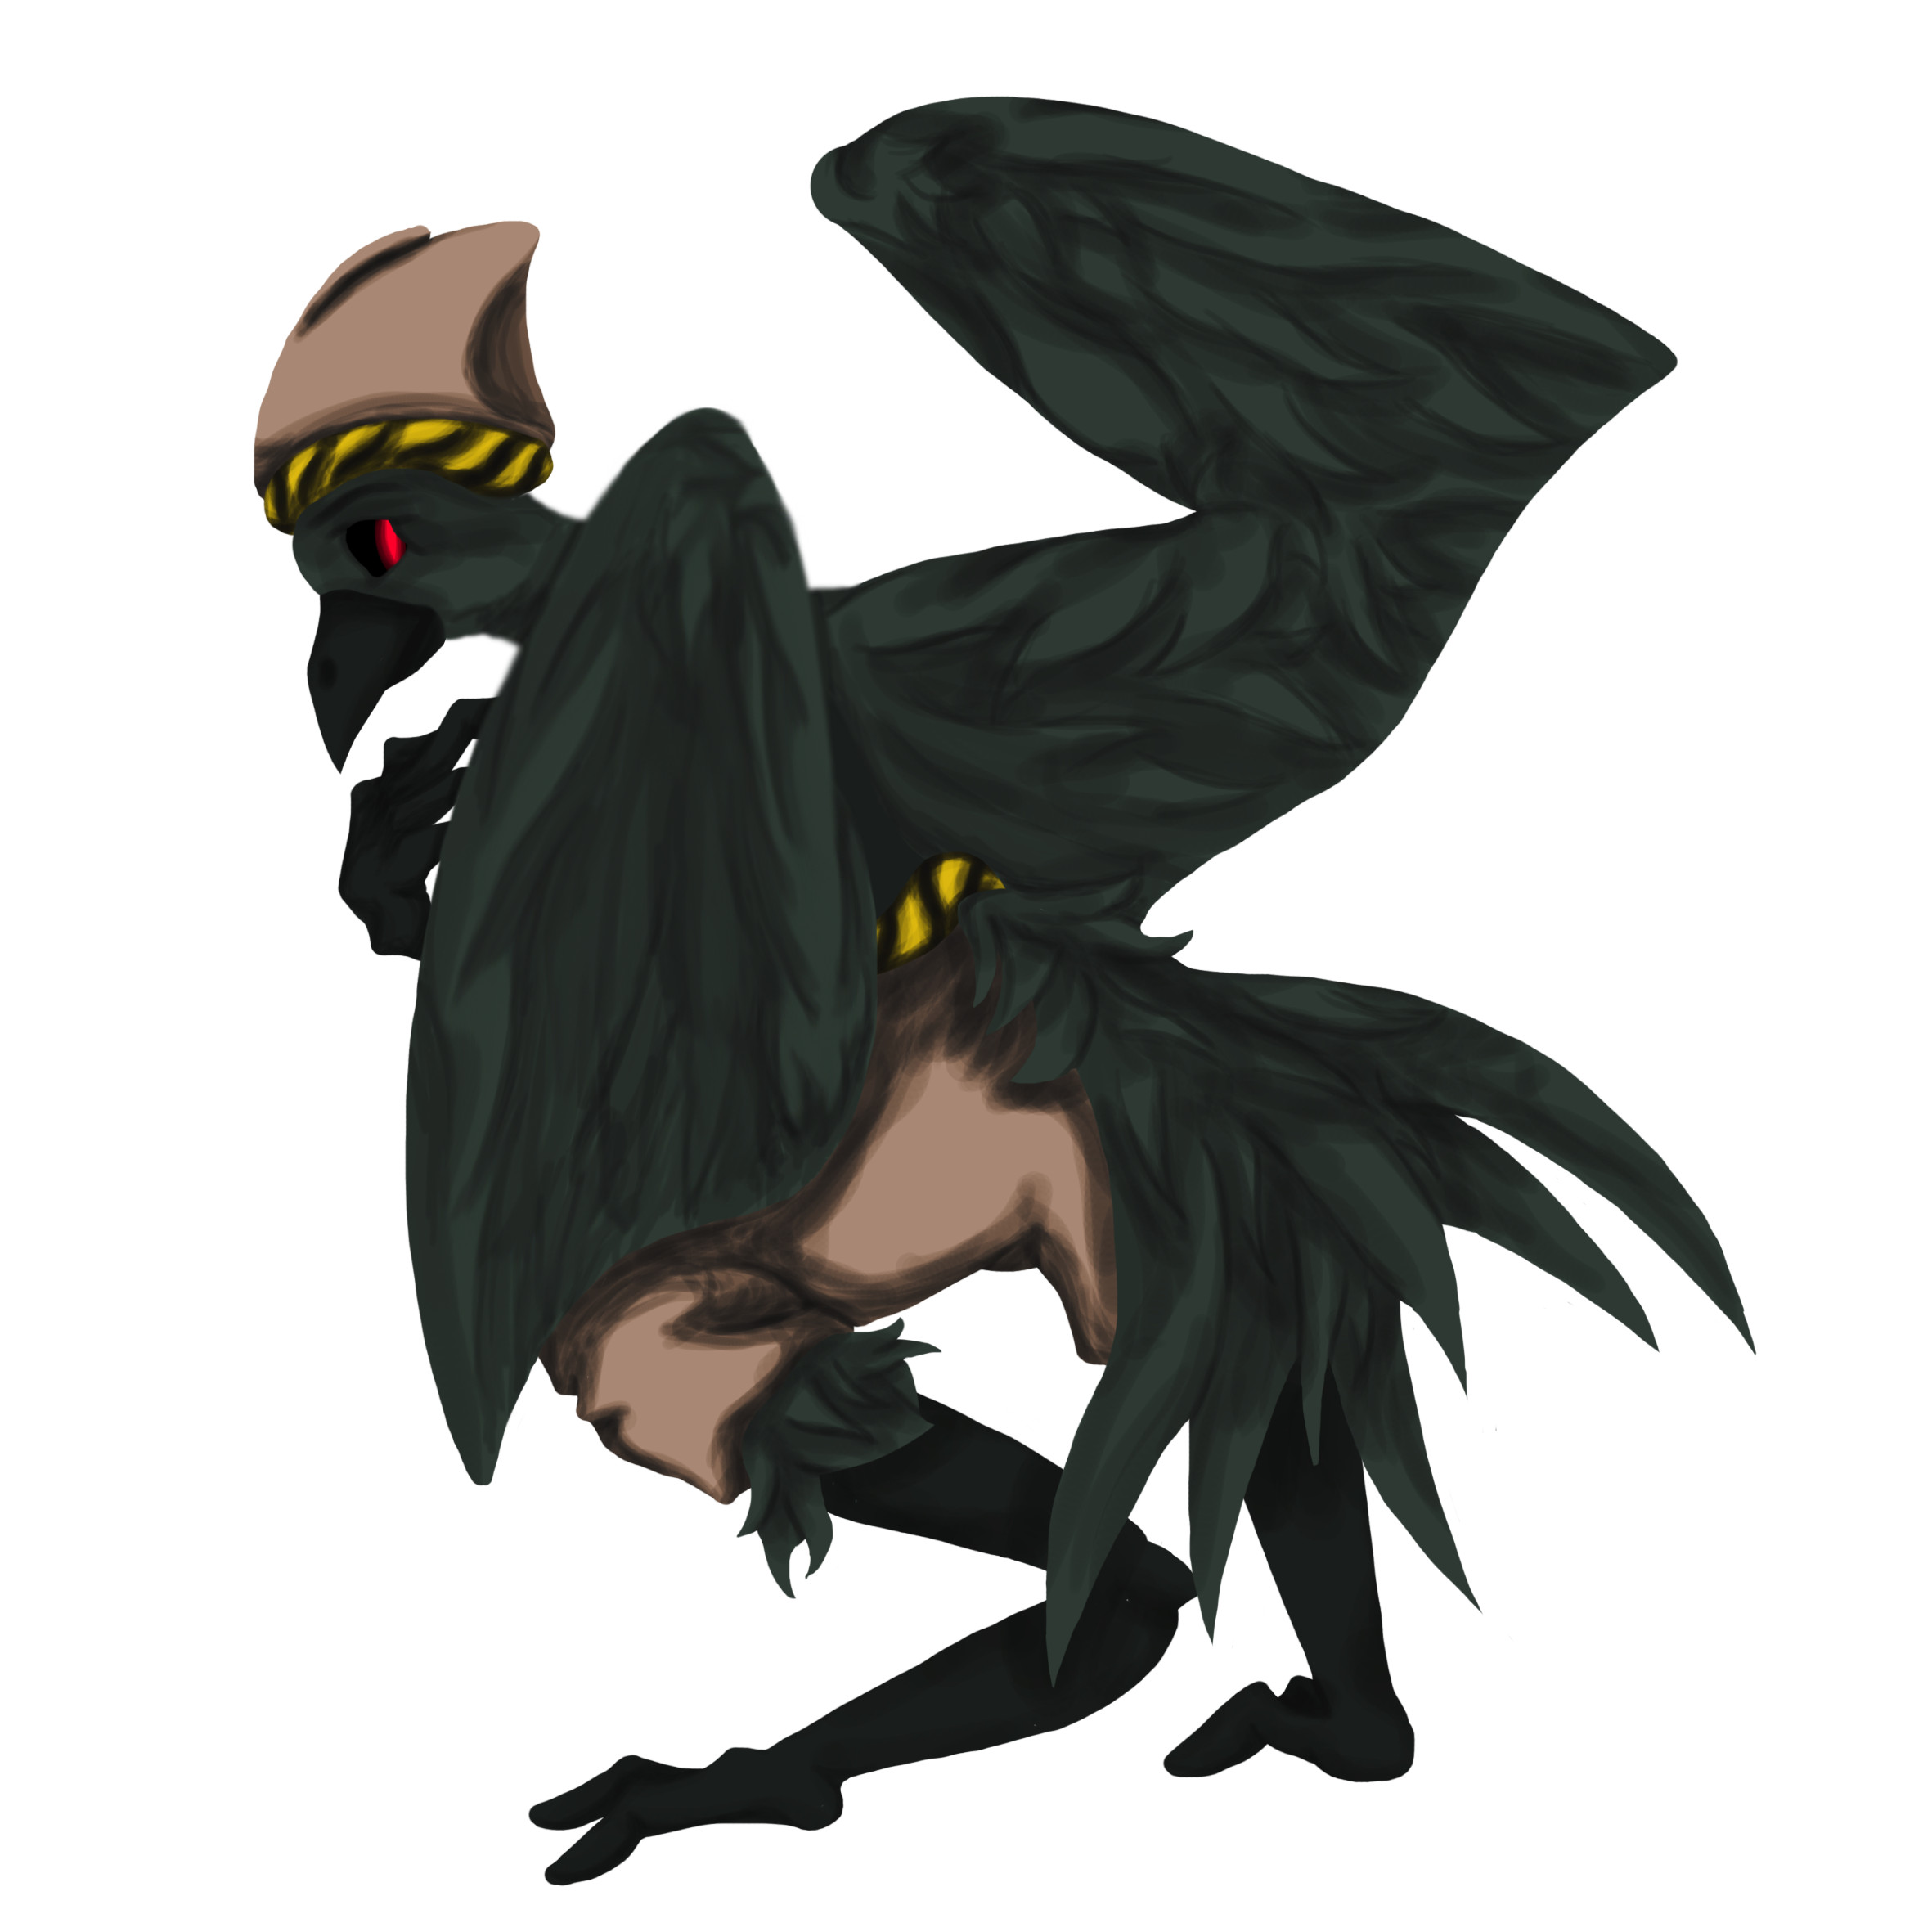 A design I did recently for a challenge. We were to draw a monster based after something in Mythology. I picked a Tengu for mine.
Done mostly in Photoshop.